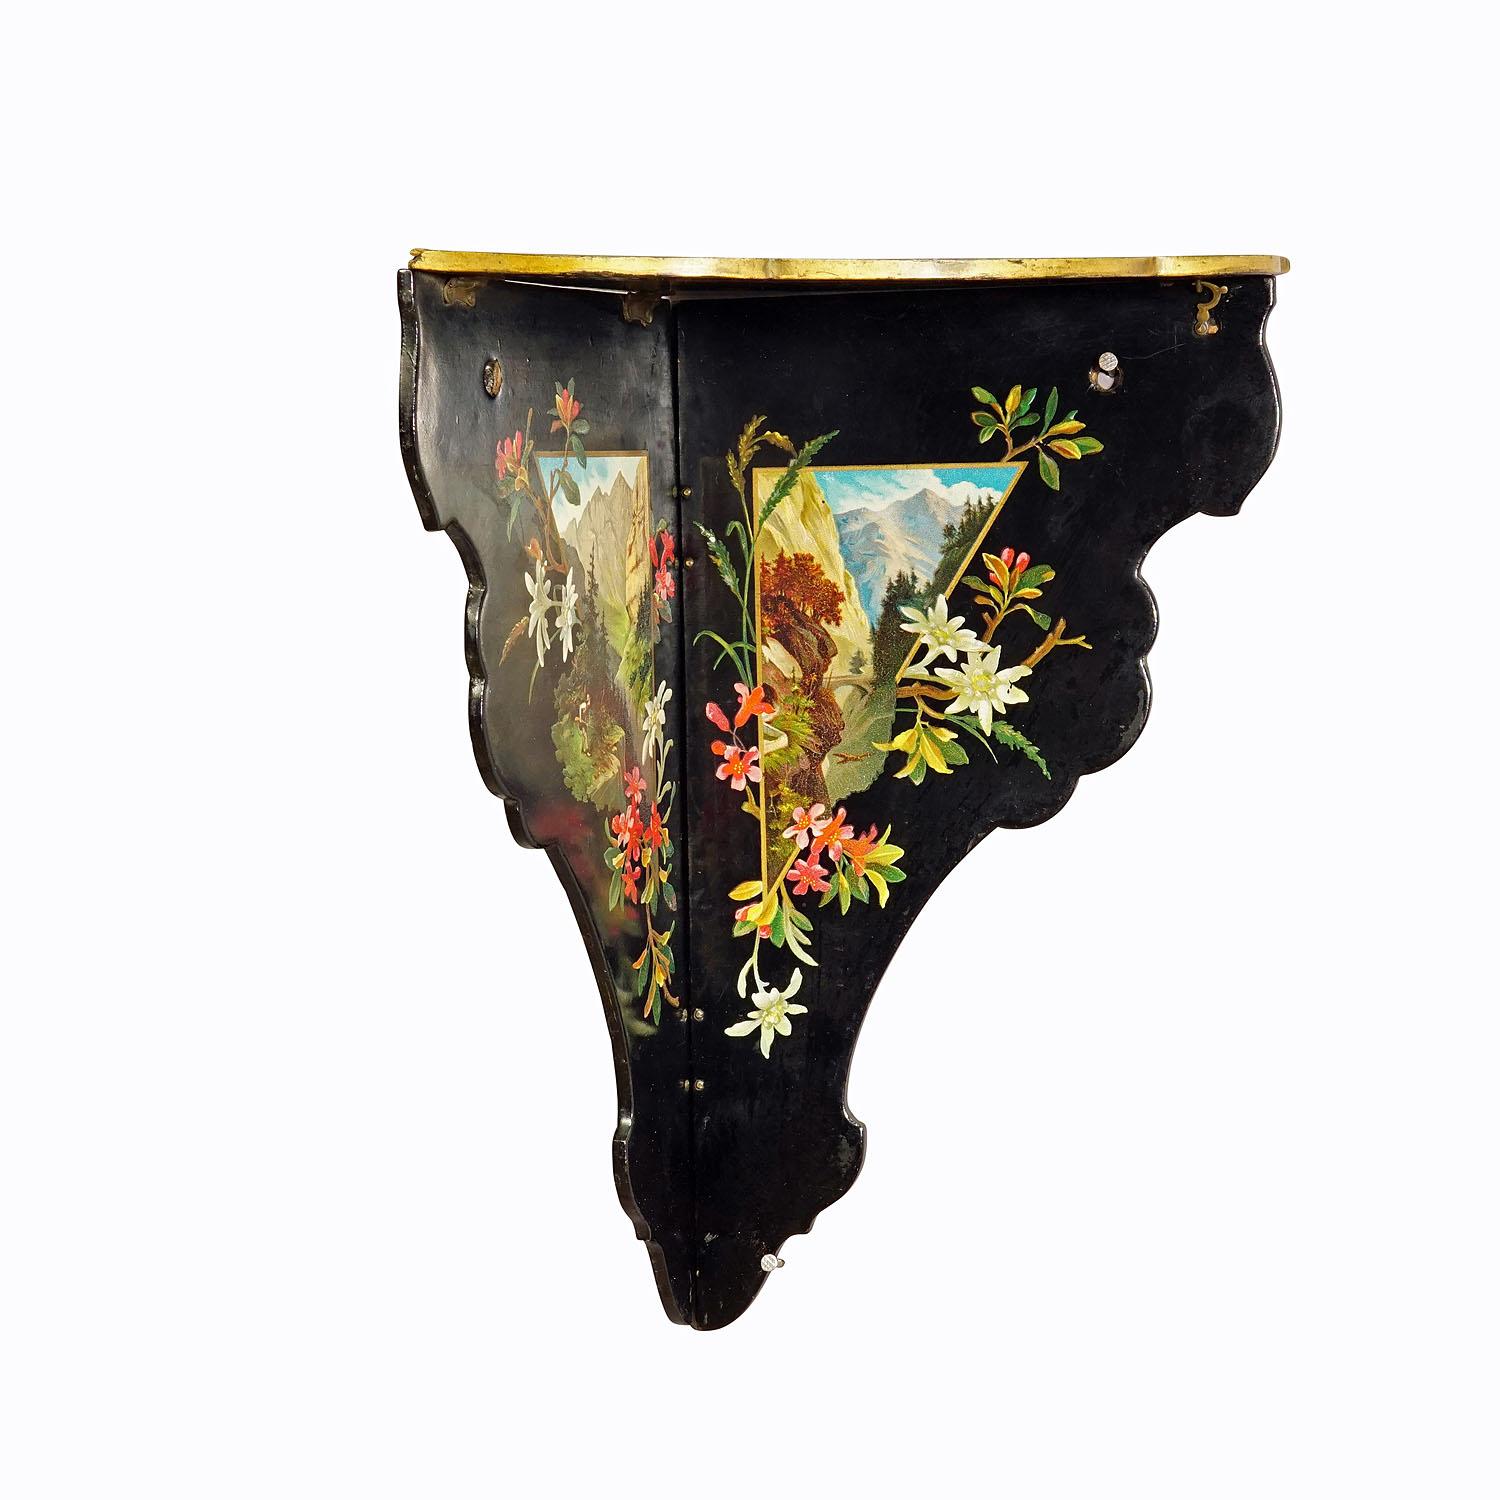 Antique Victorian Papier-Mâché wall shelve with Edelweiss Decoration

A rare antique Papier-Mâché corner shelve with hand painted alpine landscape and edelweiss decoration. Manufactured in Germany, Black Forest in the 19th century. The foldable